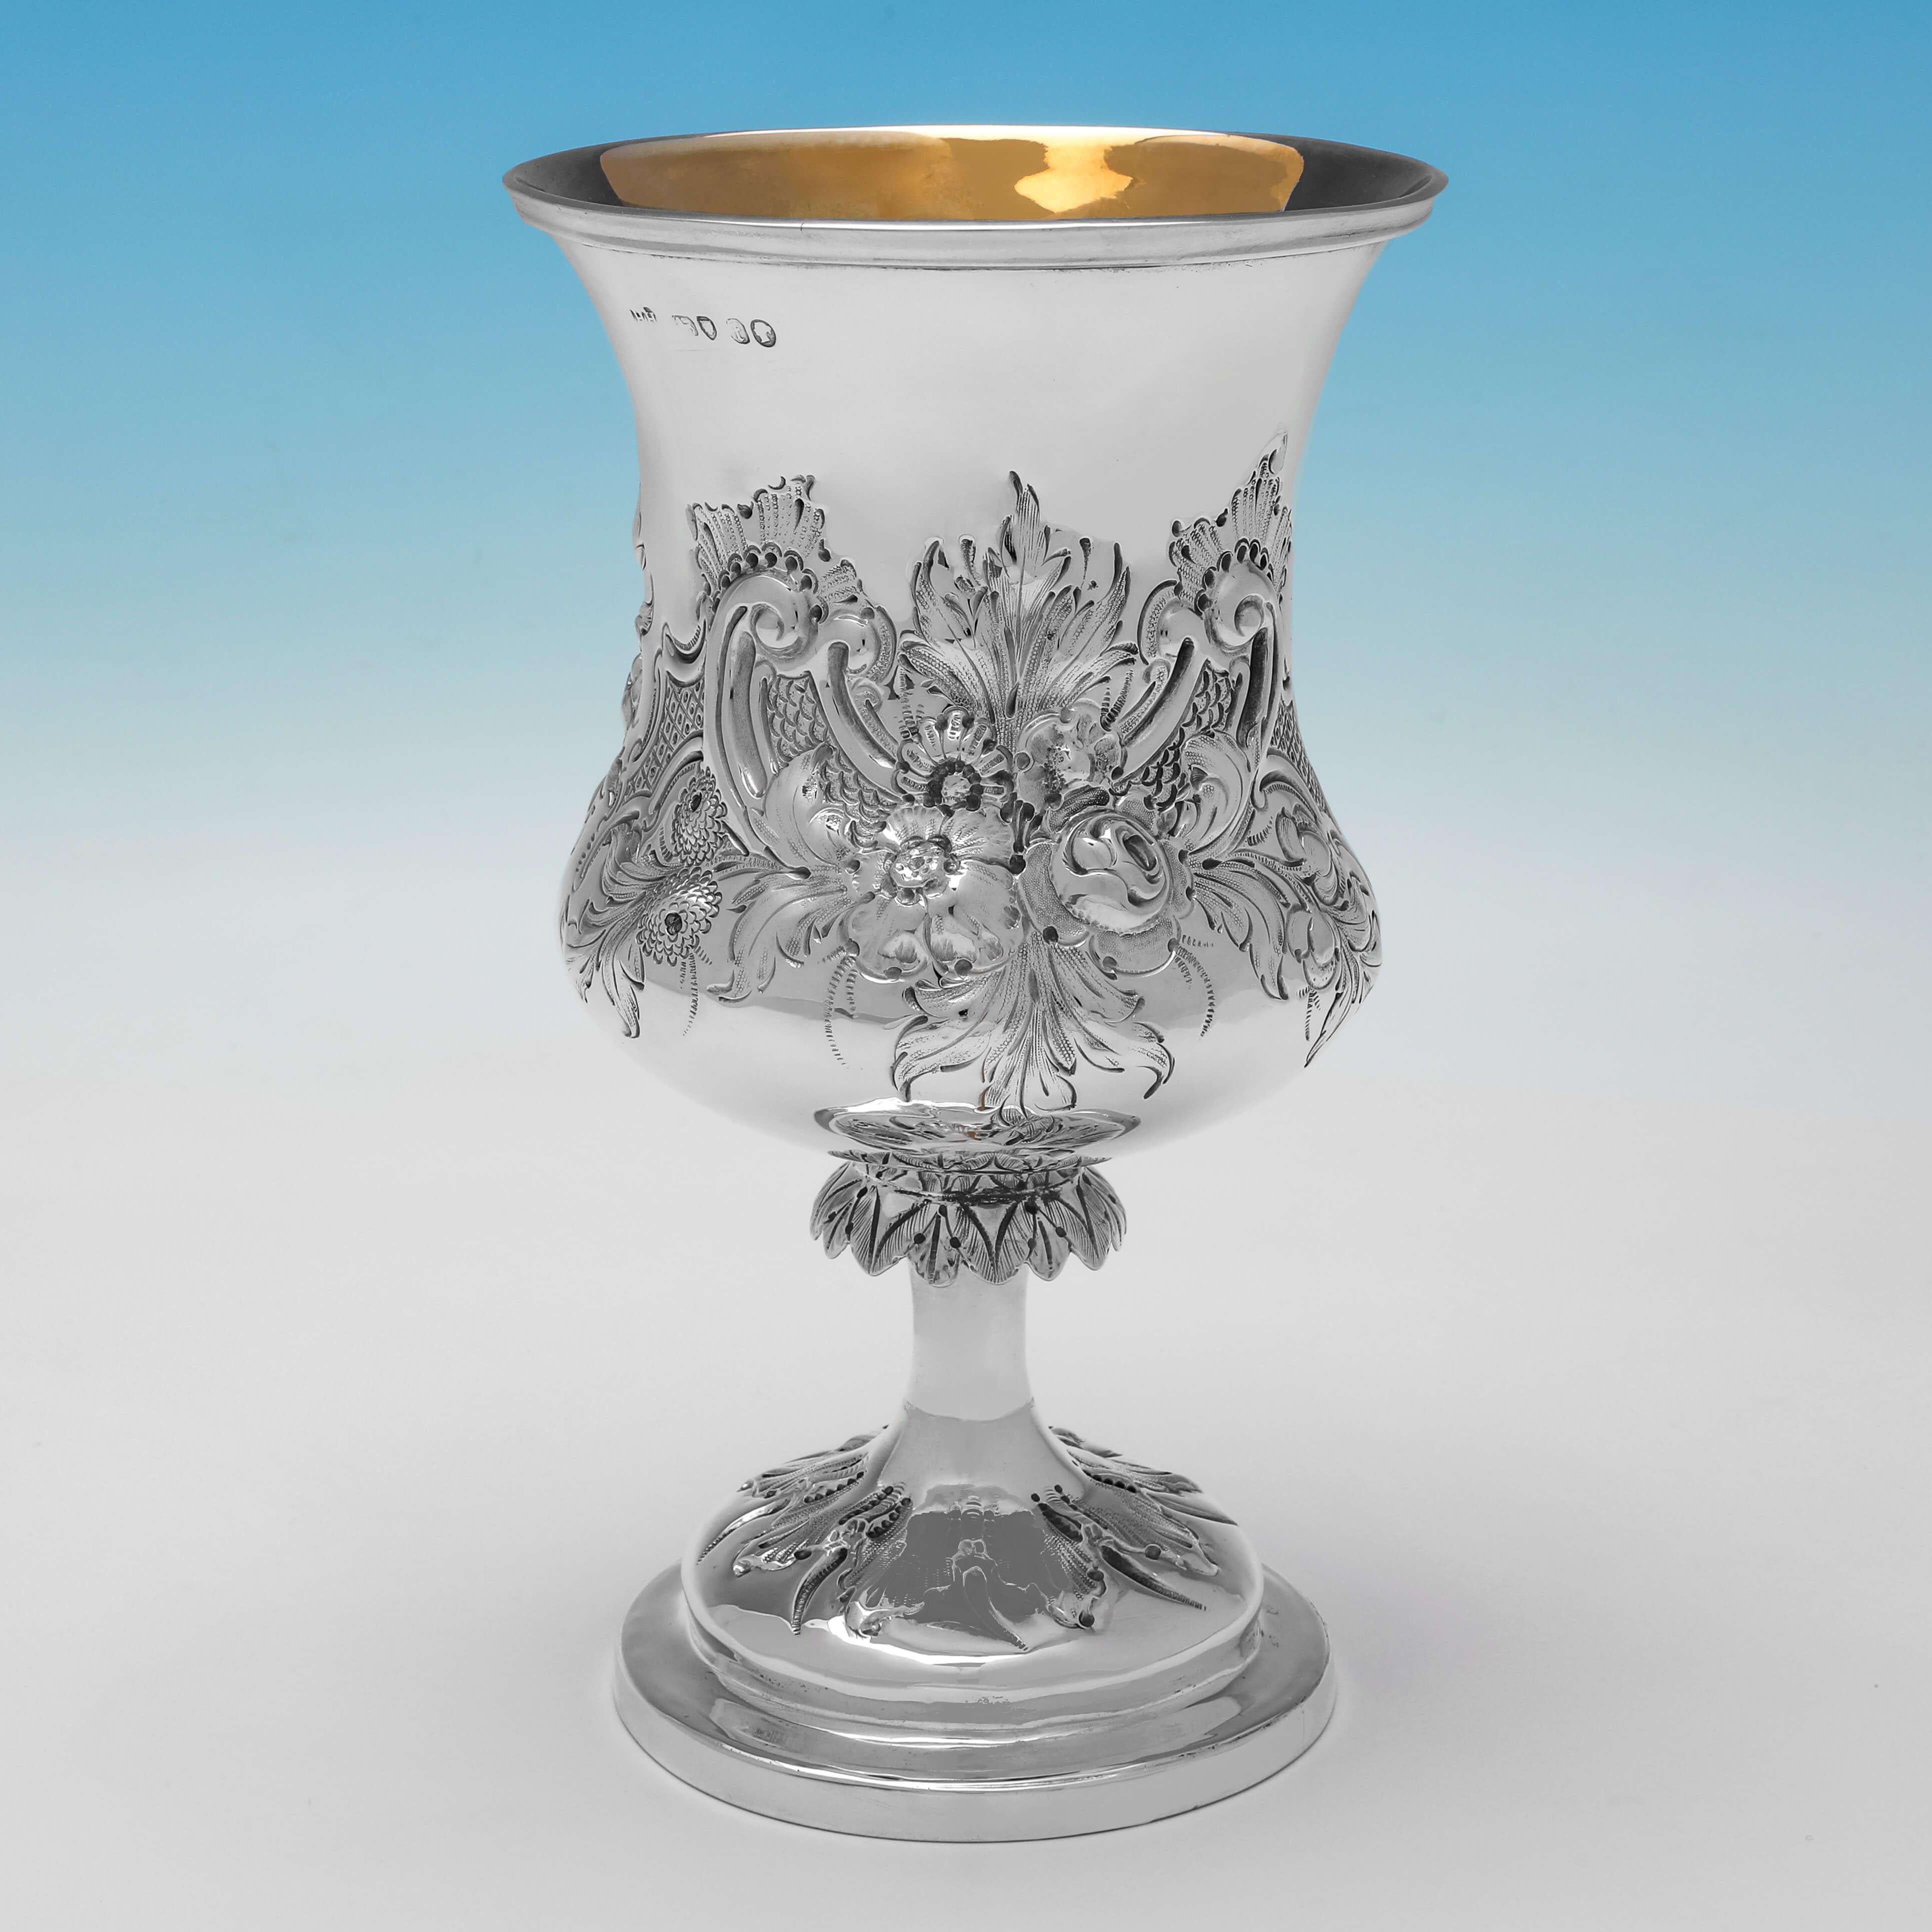 Hallmarked in London in 1861 by Henry Holland, this stunning, Victorian, Antique Sterling Silver Goblet, is campagna shaped, and features chased floral and scroll decoration to the body and foot, and a gilt interior. 

The goblet measures 7